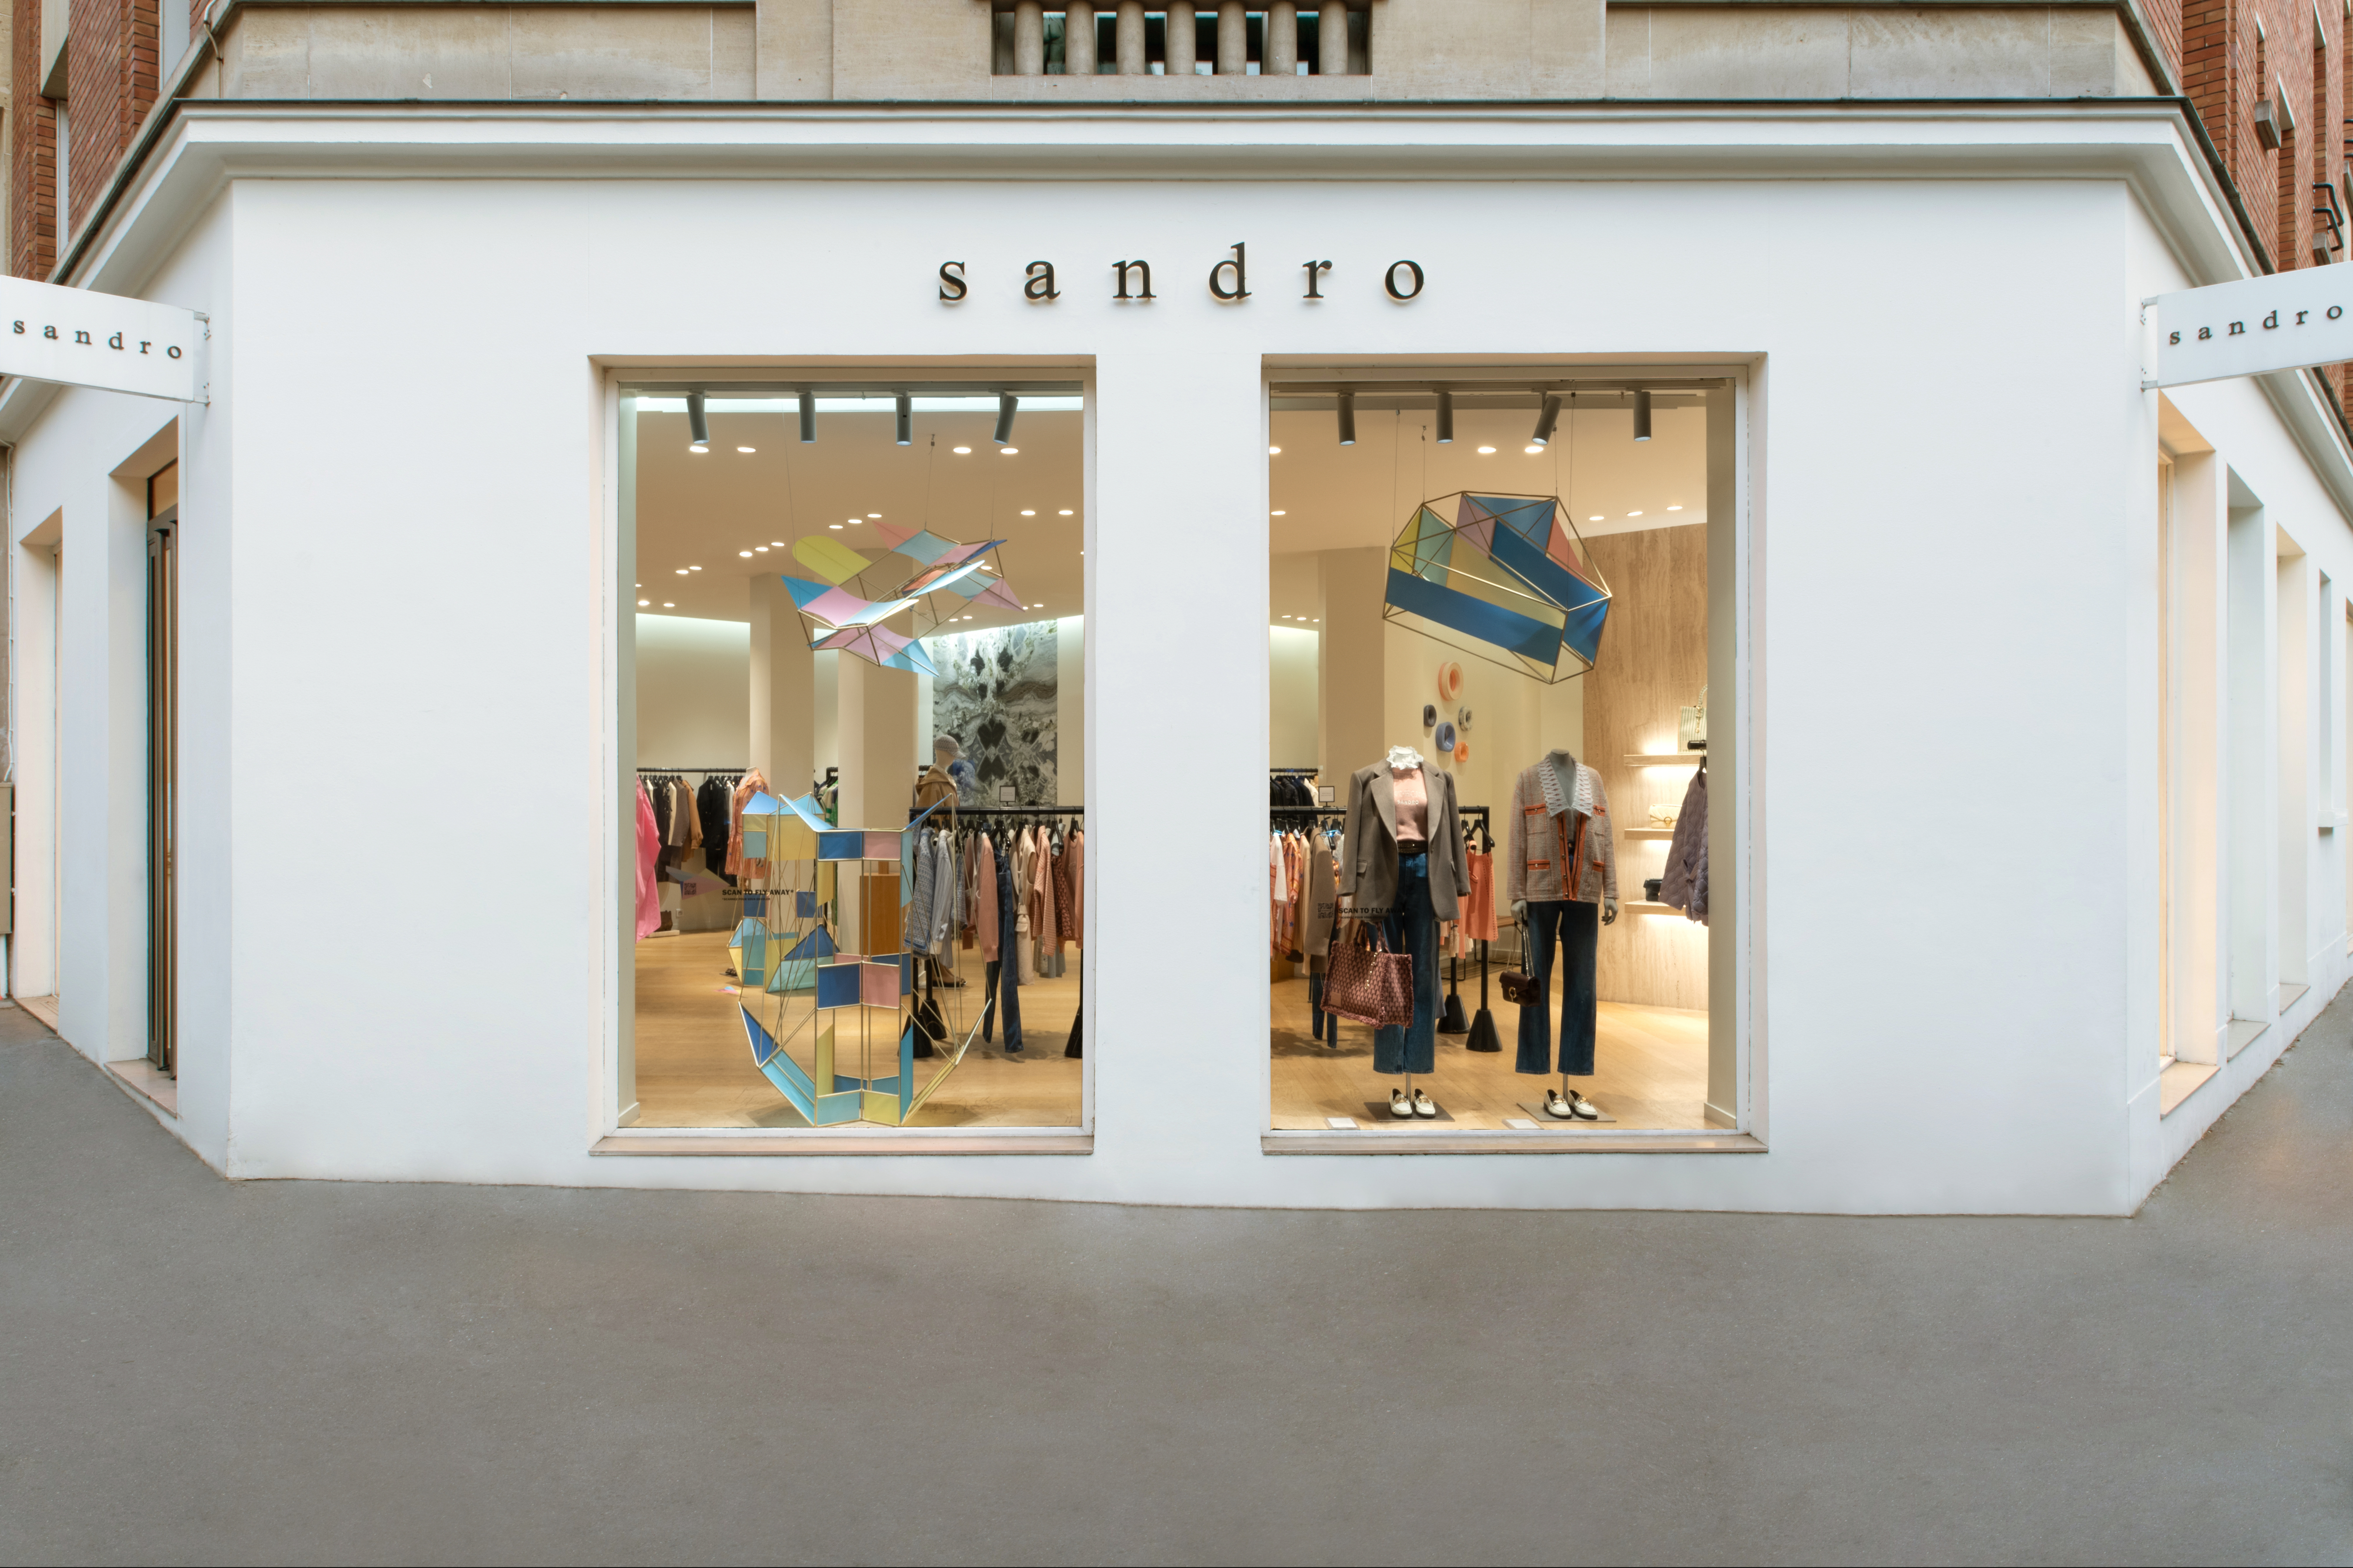 Sandro expands presence in the US